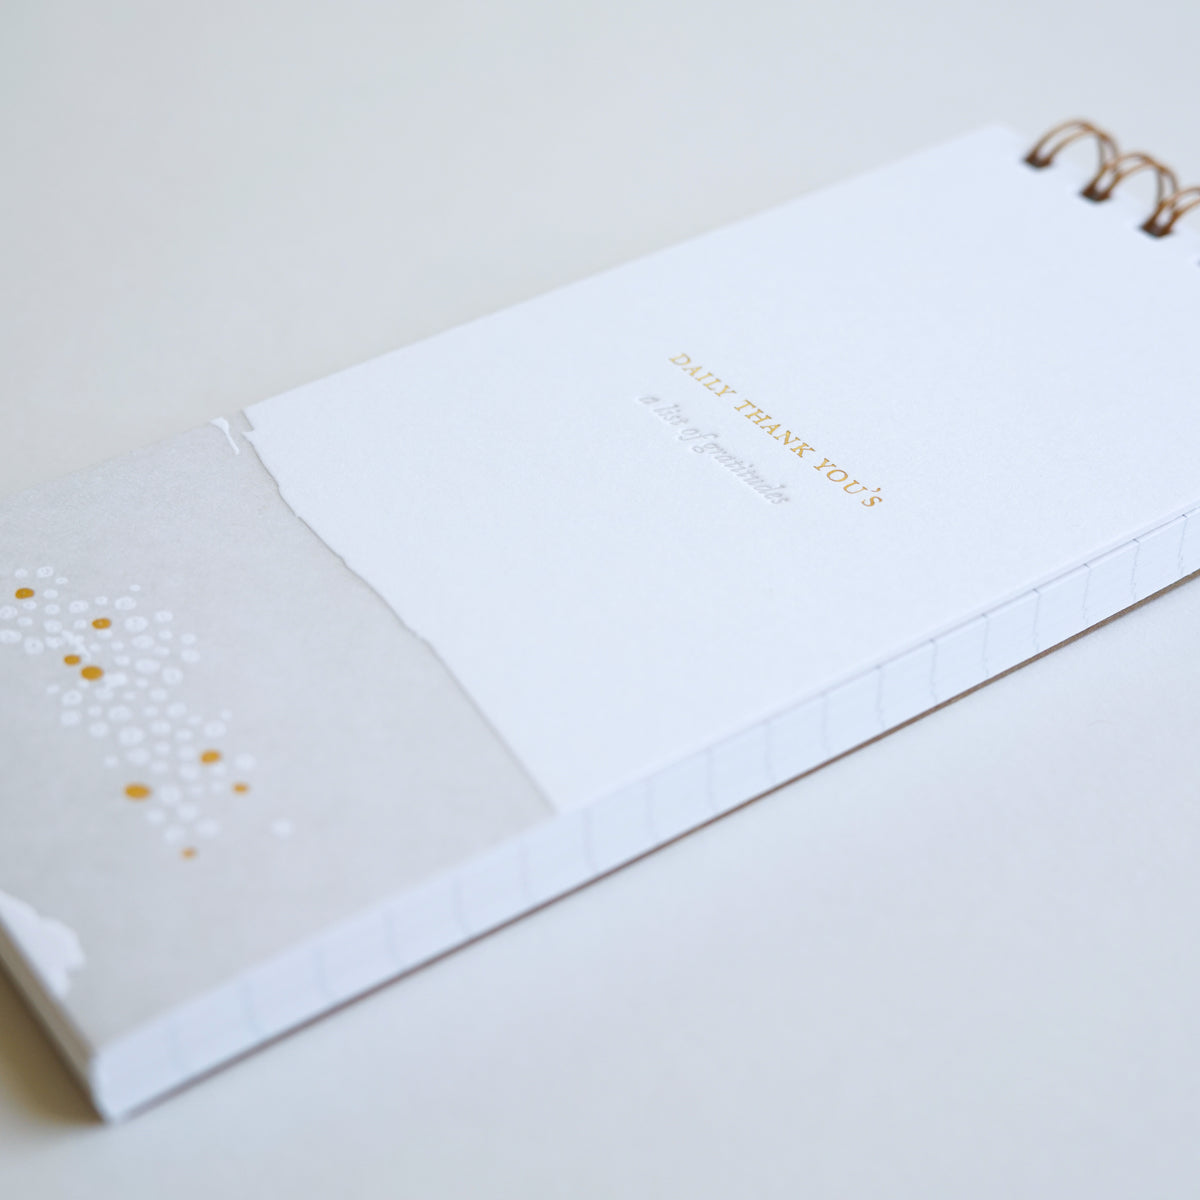 &quot;Daily Thank You&#39;s&quot; lined notebook, letterpress printed by hand.